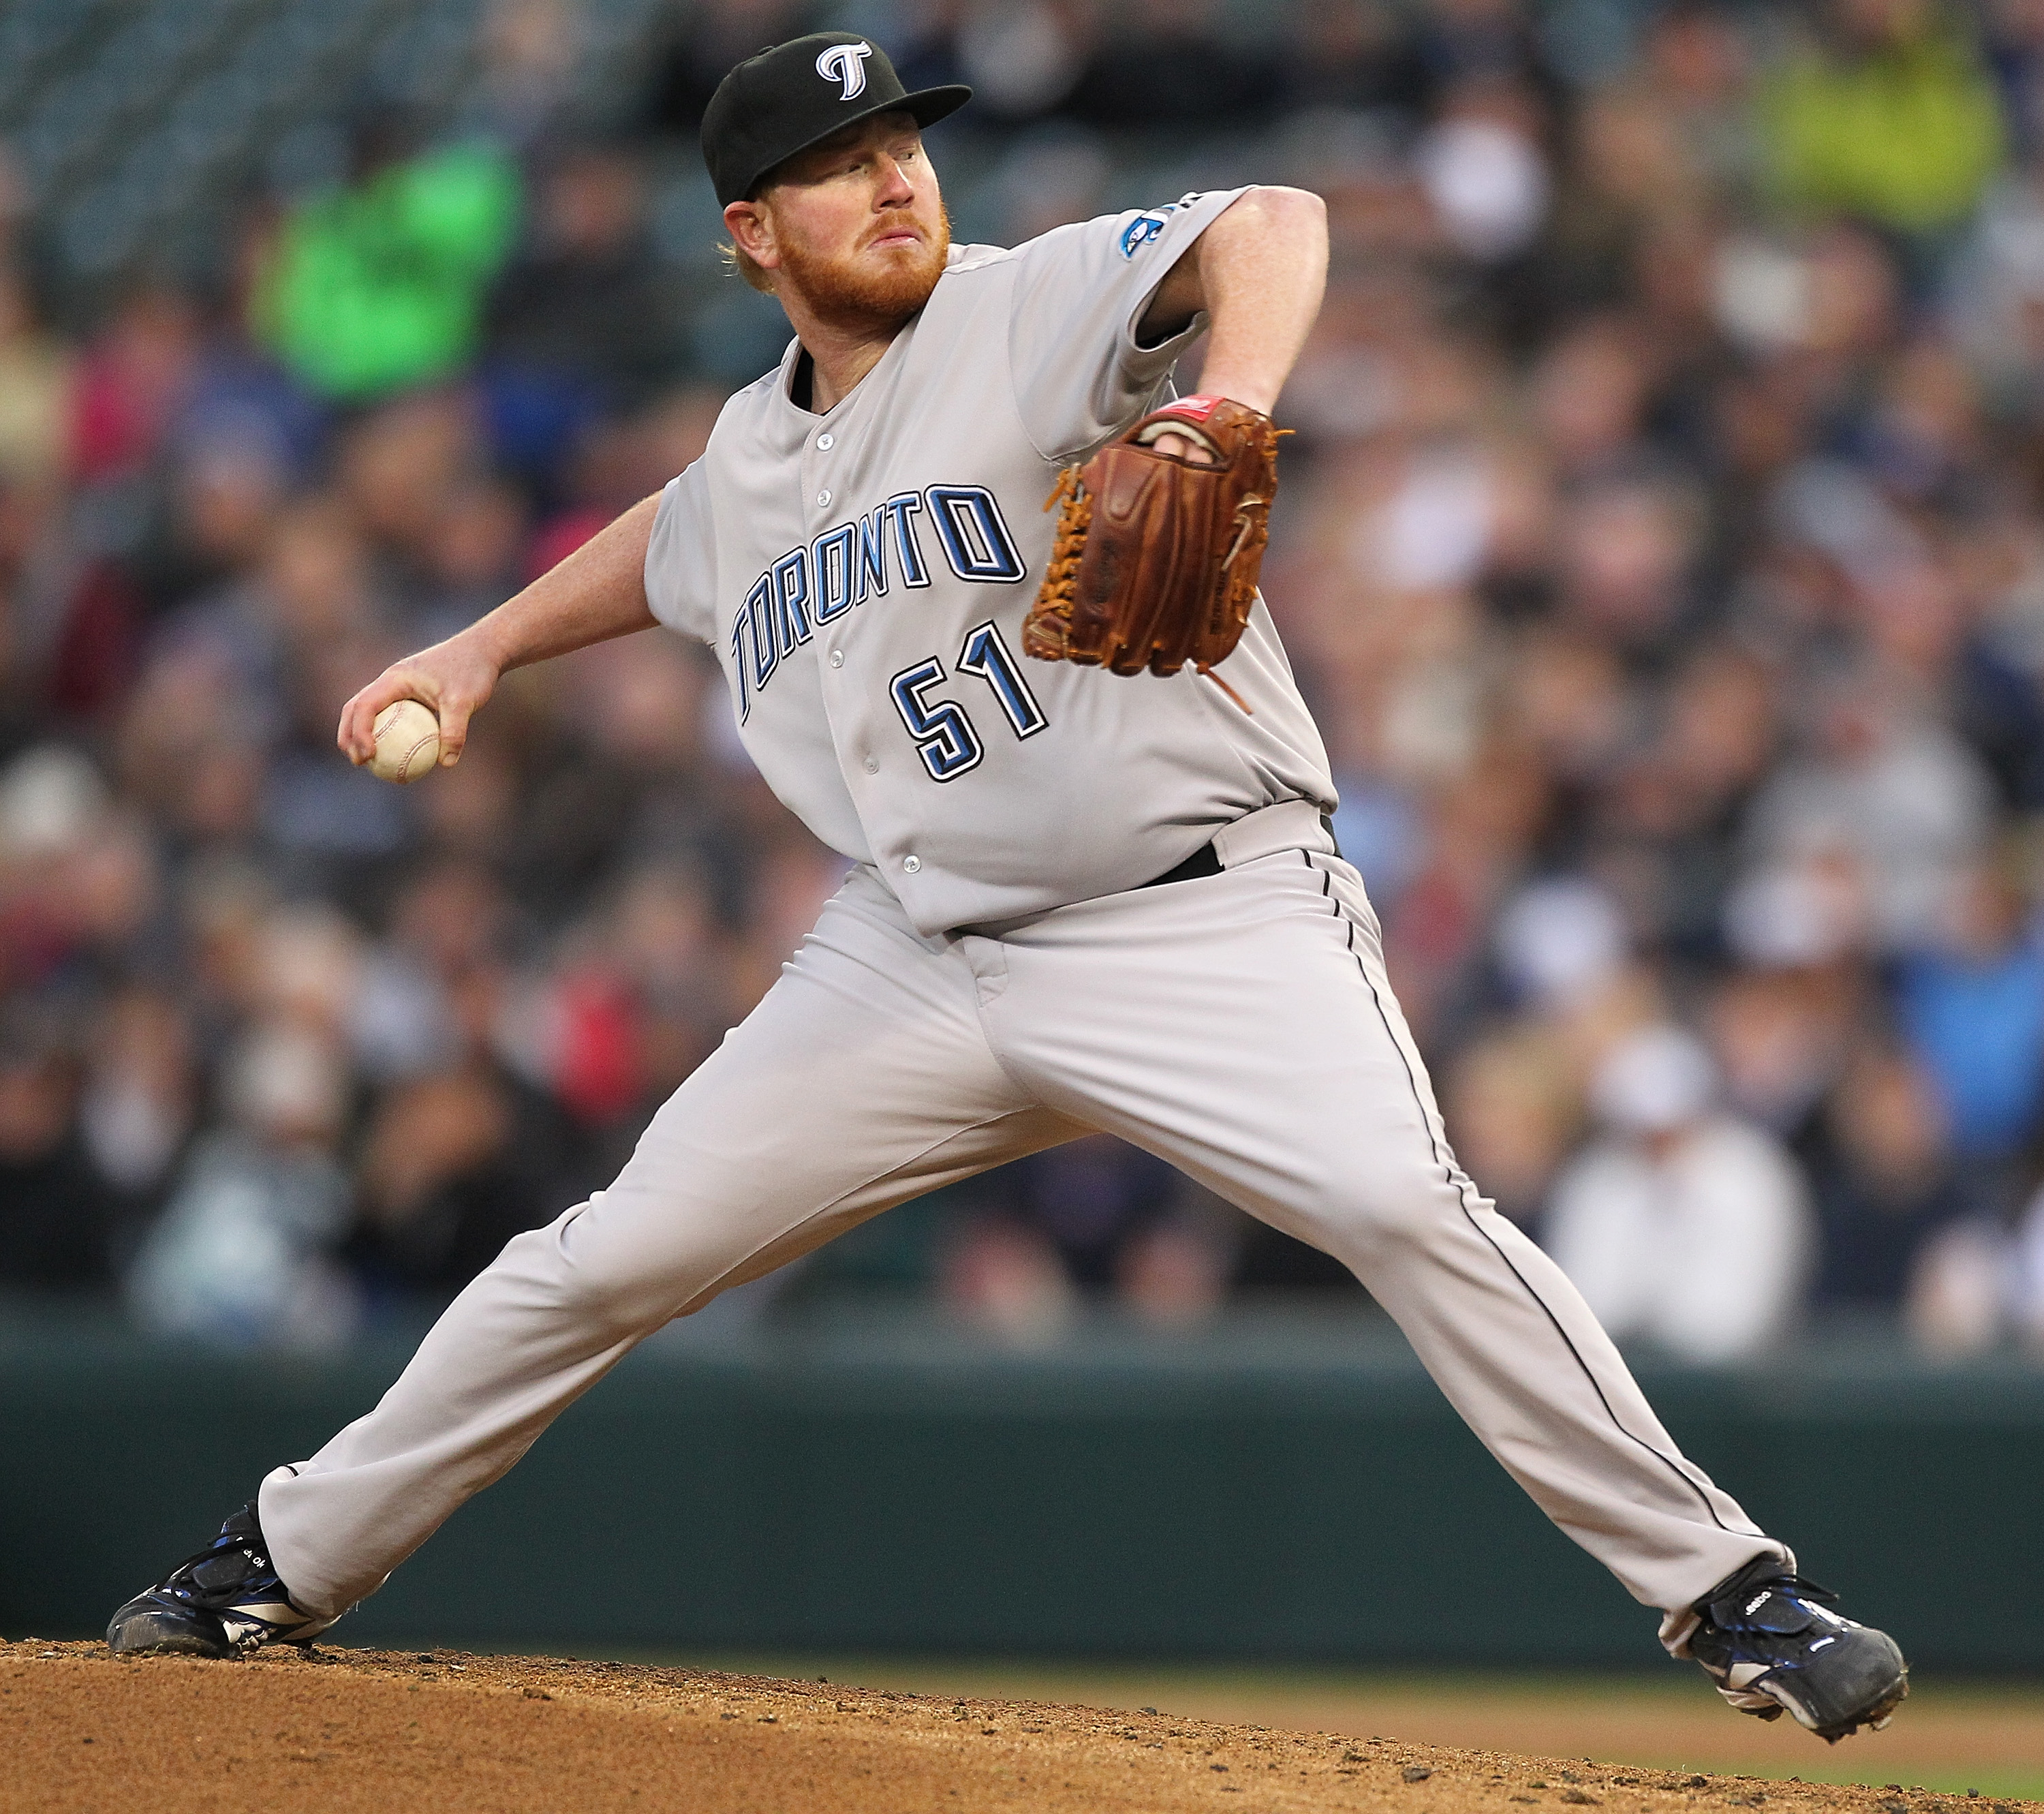 SEATTLE - APRIL 11:  Starting pitcher Jesse Litsch #51 of the Toronto Blue Jays pitches against the Seattle Mariners at Safeco Field on April 11, 2011 in Seattle, Washington. (Photo by Otto Greule Jr/Getty Images)